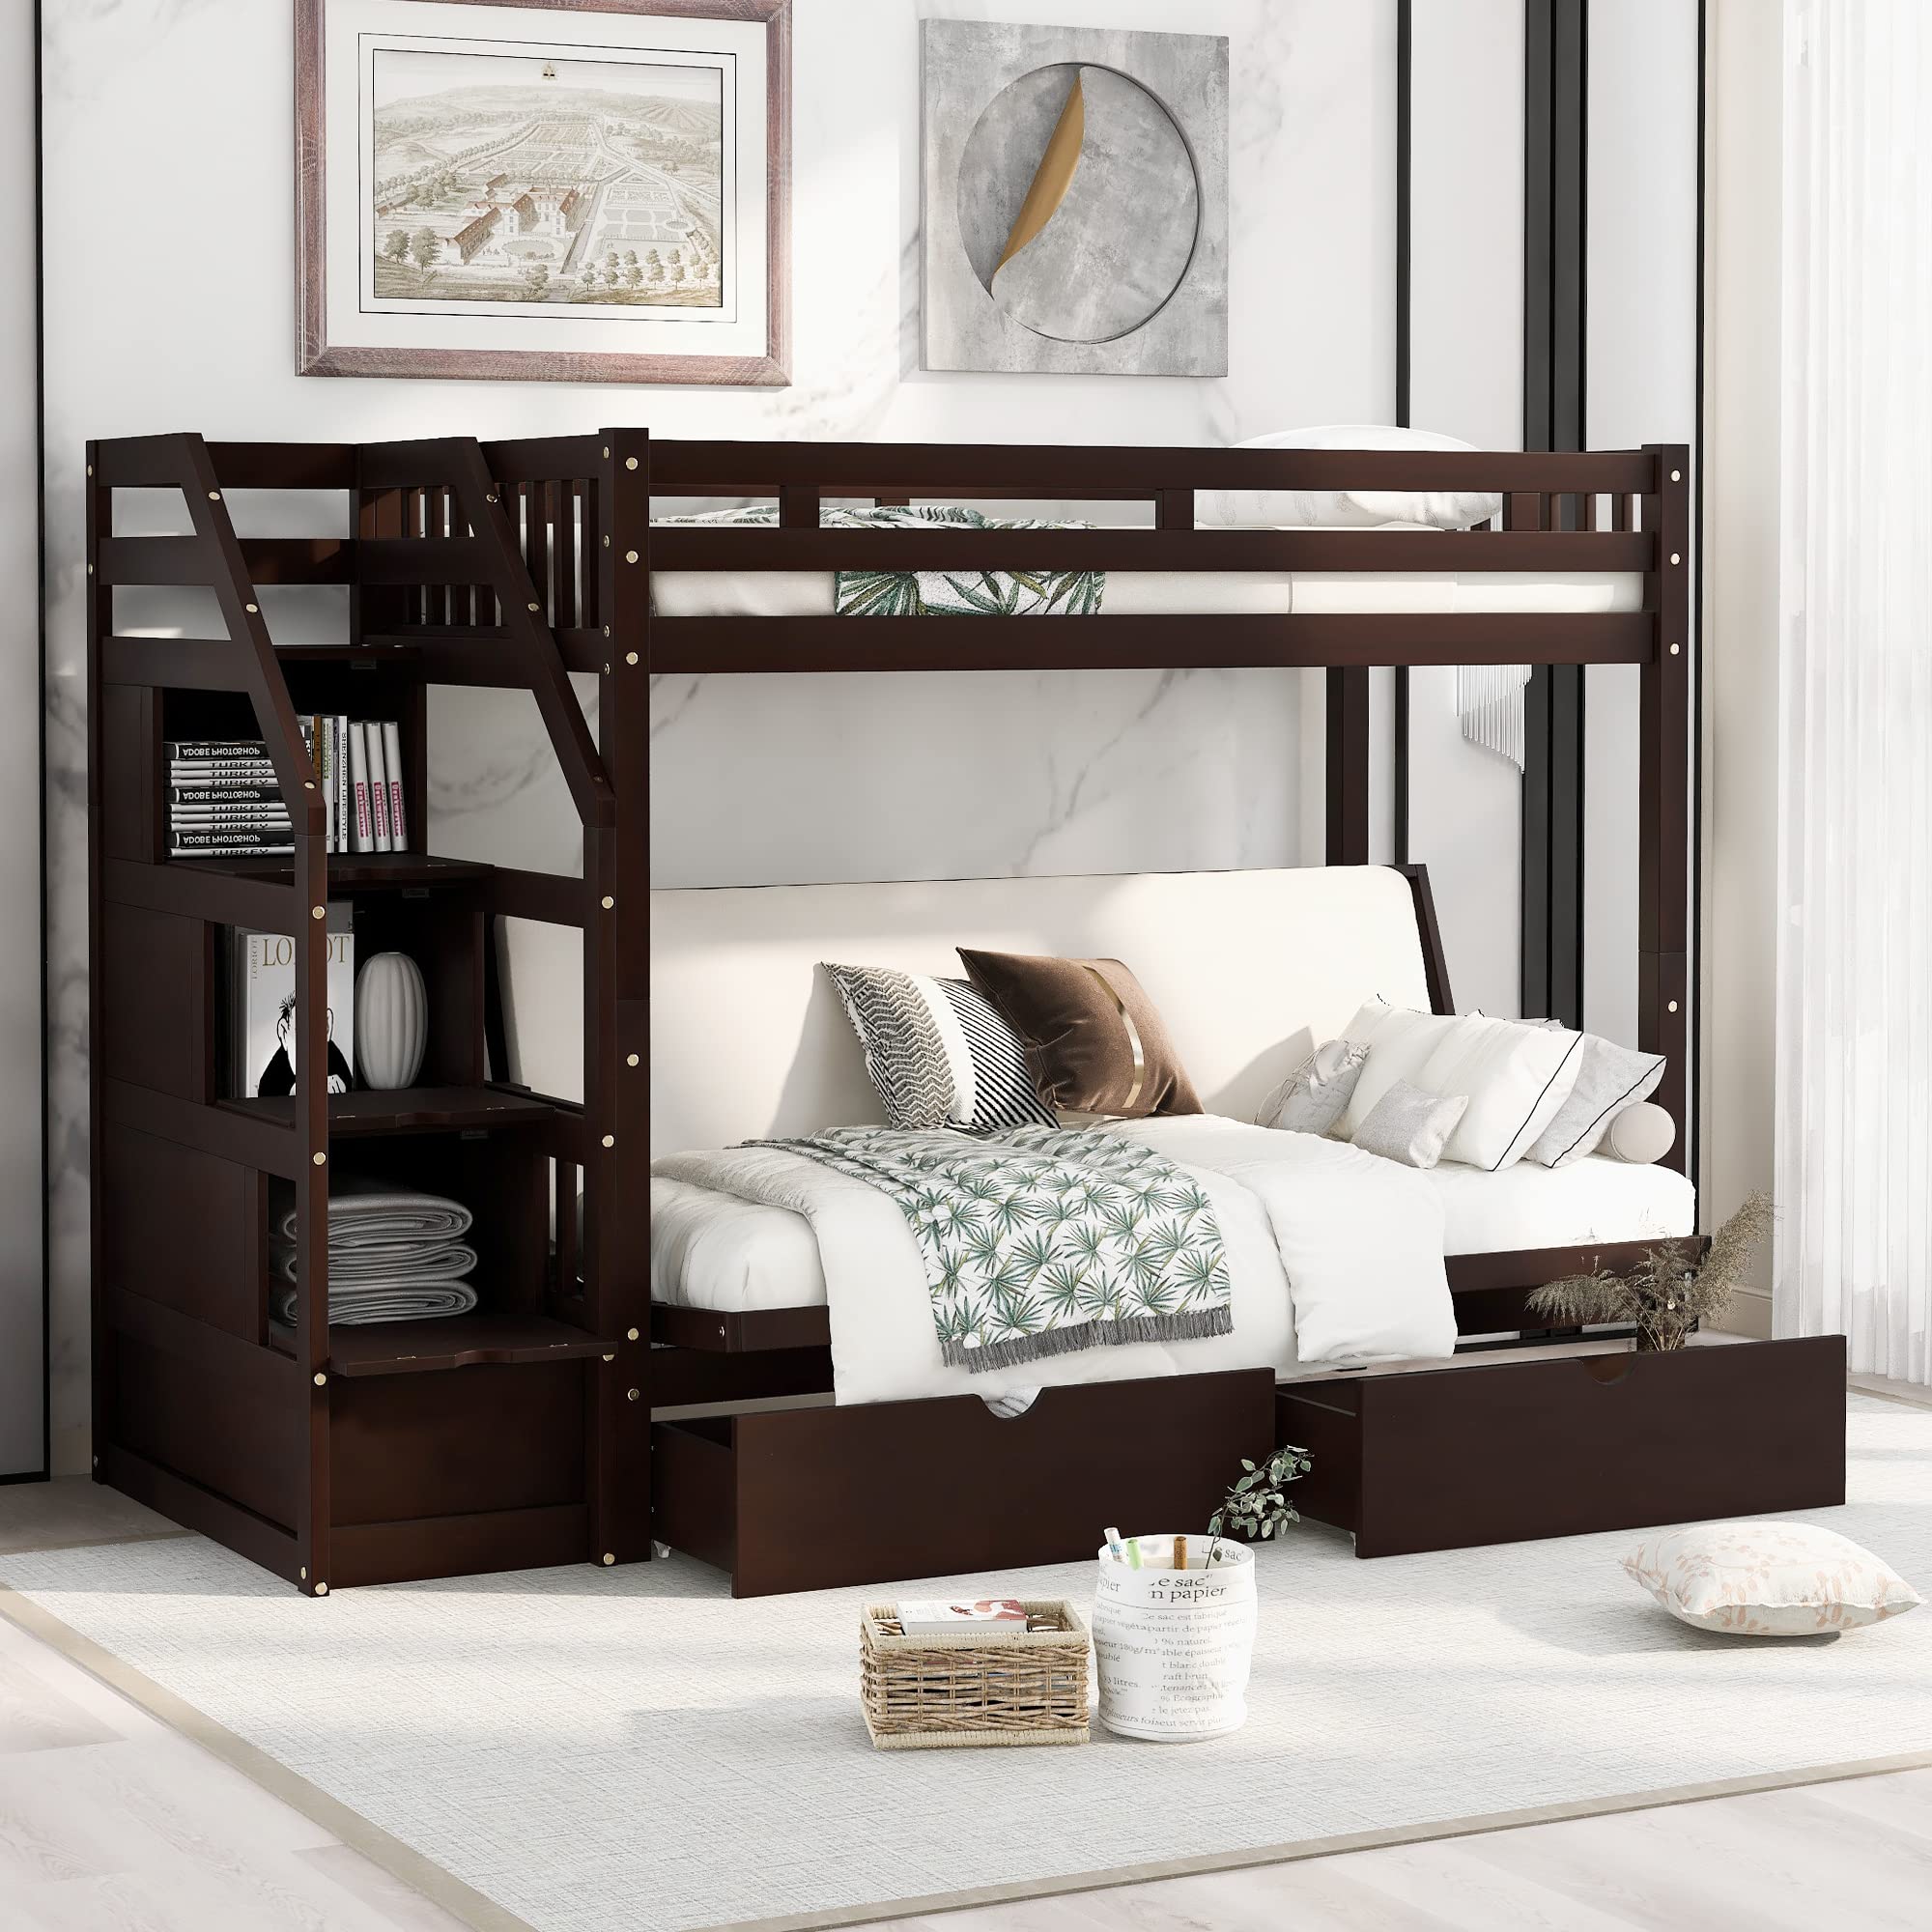 Harper & Bright Desi Twin Over Full Futon Bunk Beds with Stairs and Two Storage Drawers Down Bed can be converted into Daybed Wooden Bunk Bed Frame f